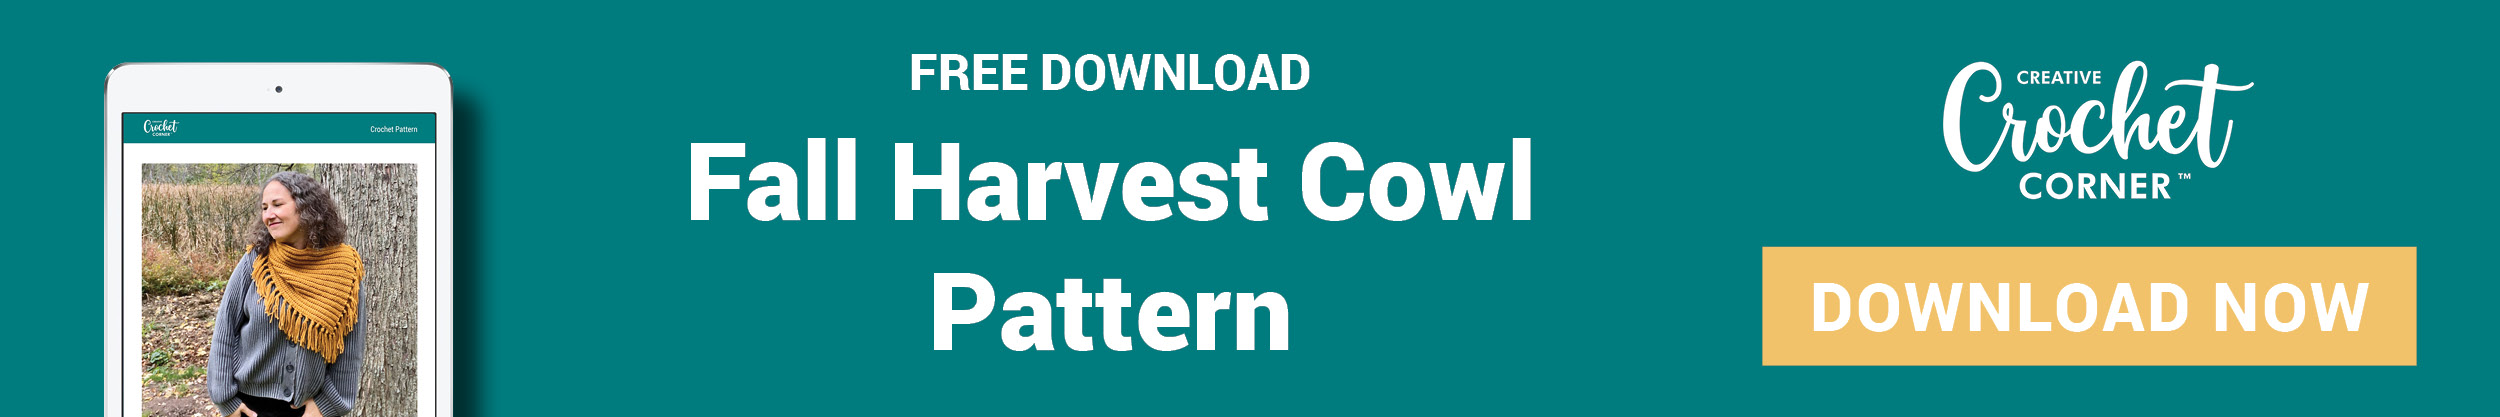 Download the free Fall Harvest Cowl Pattern